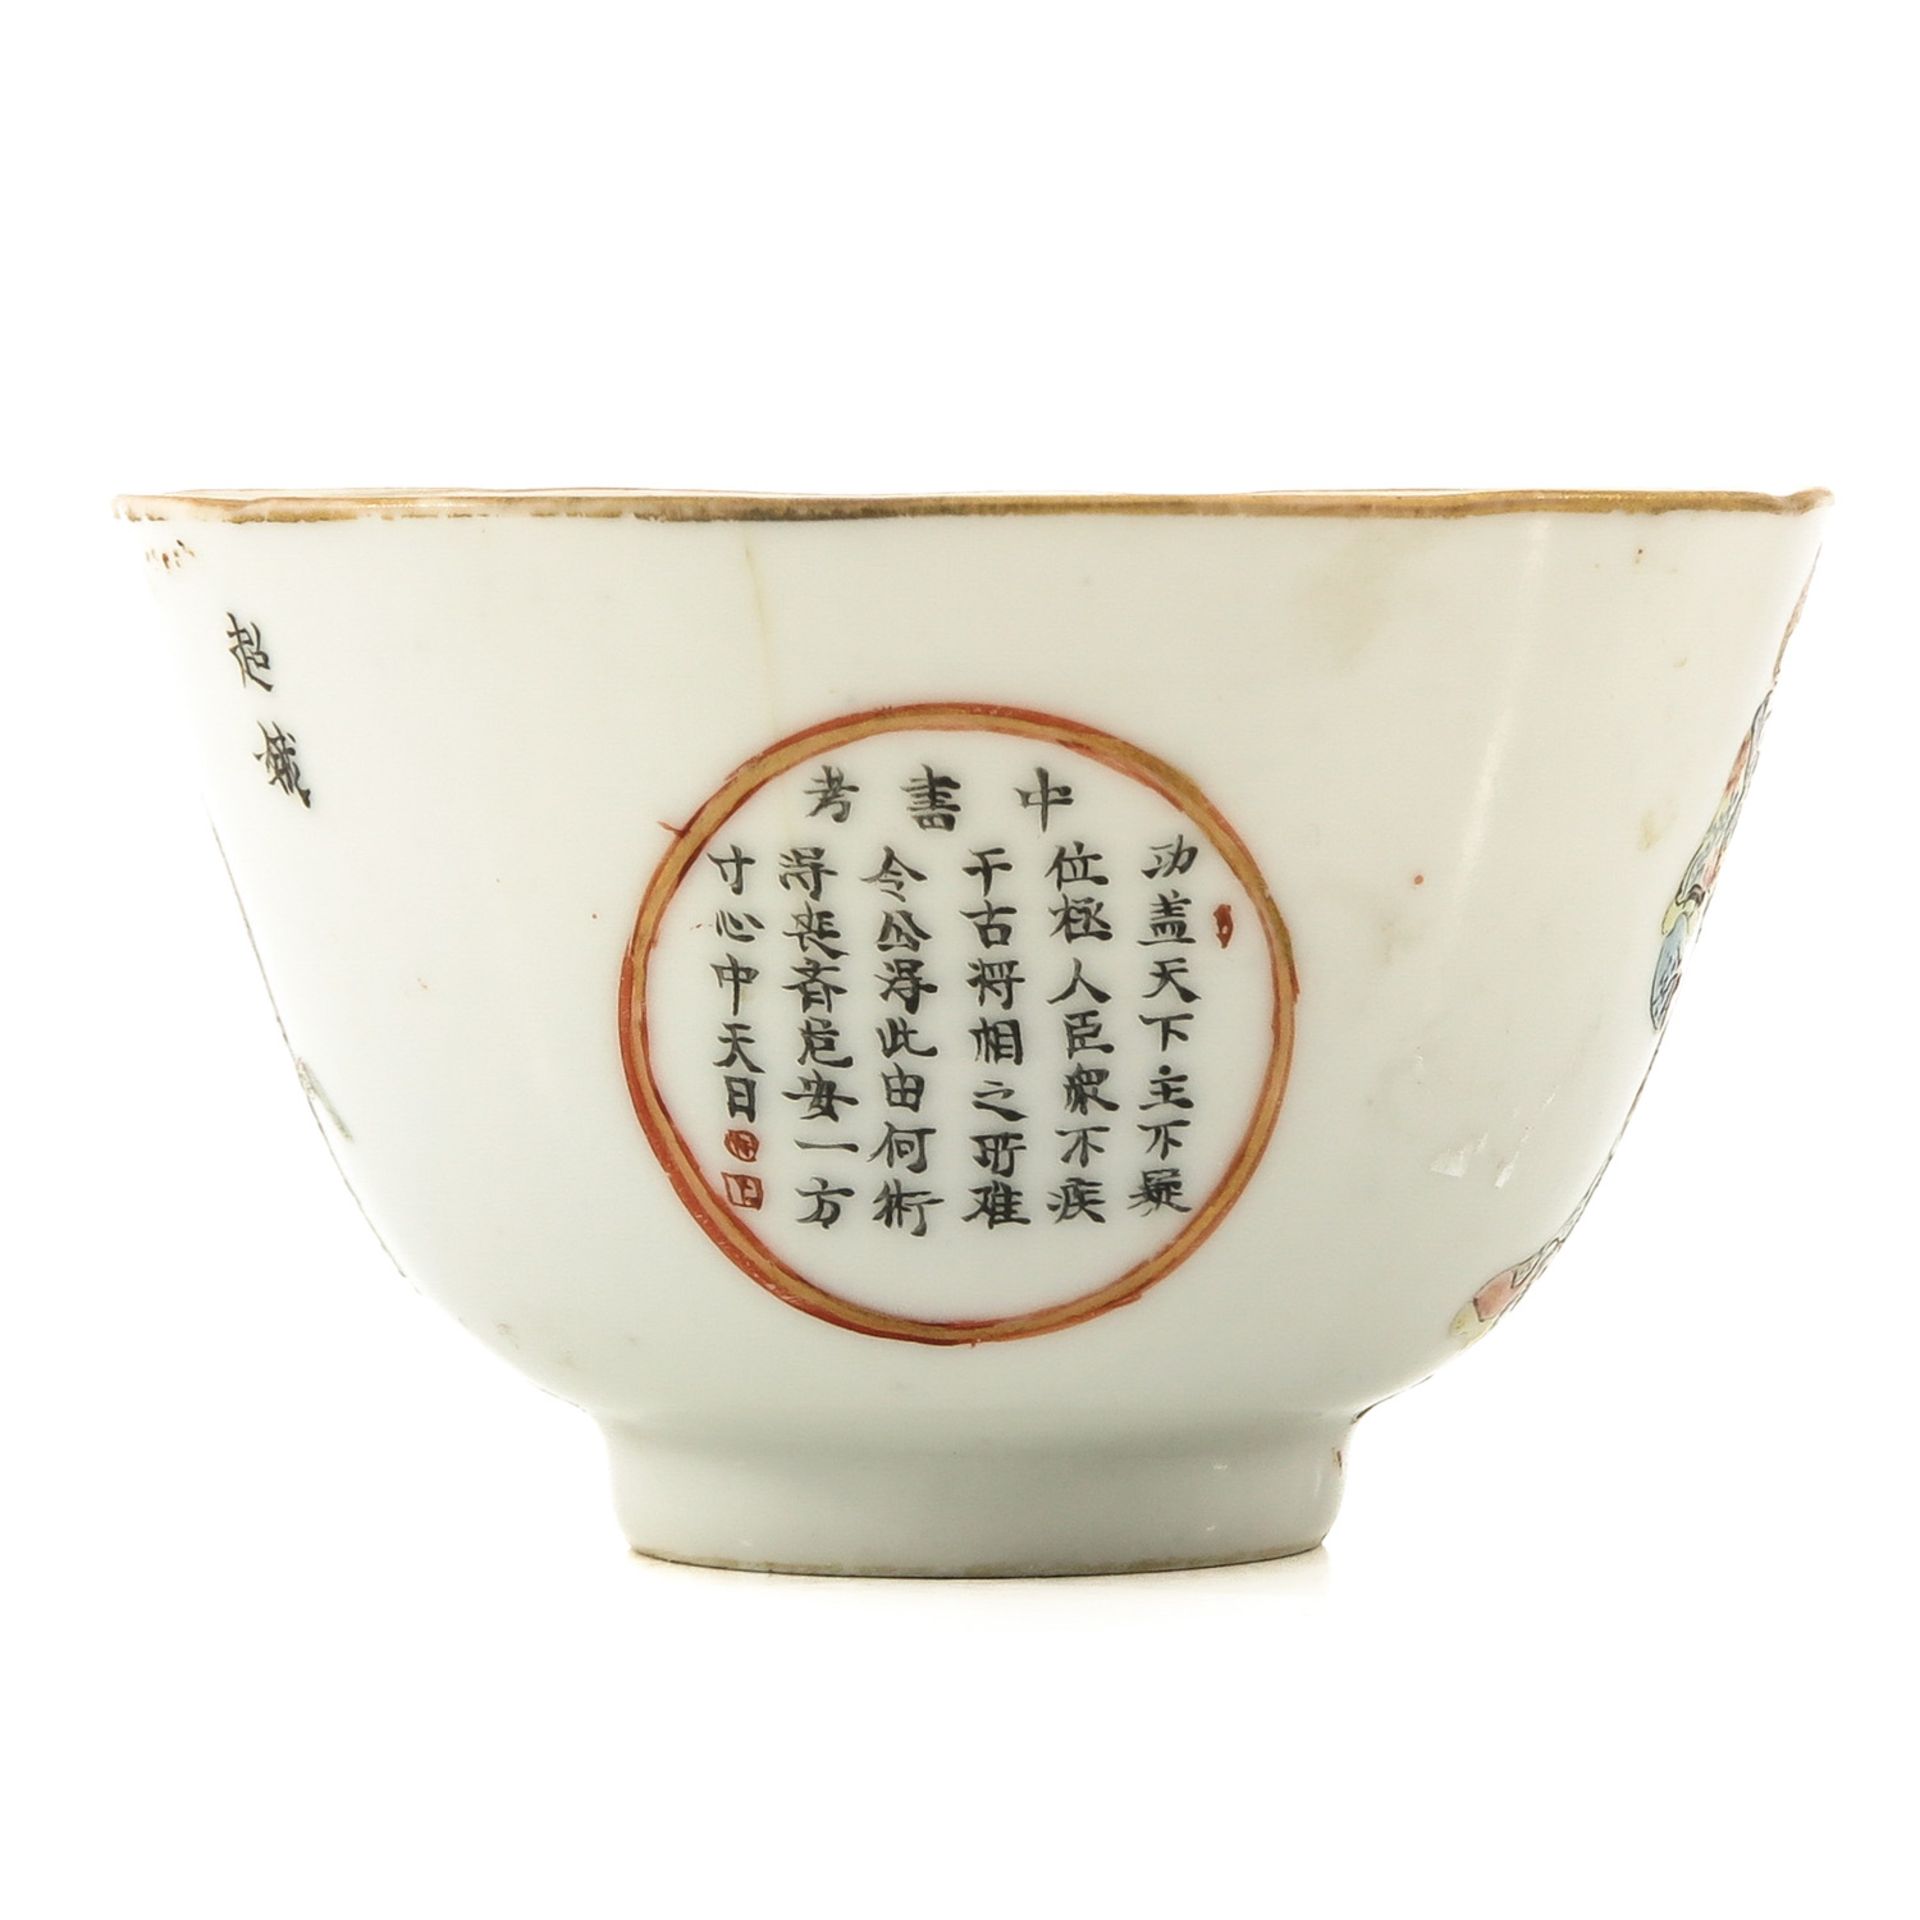 A Wu Shuang Pu Decor Cup and Saucer - Image 4 of 9